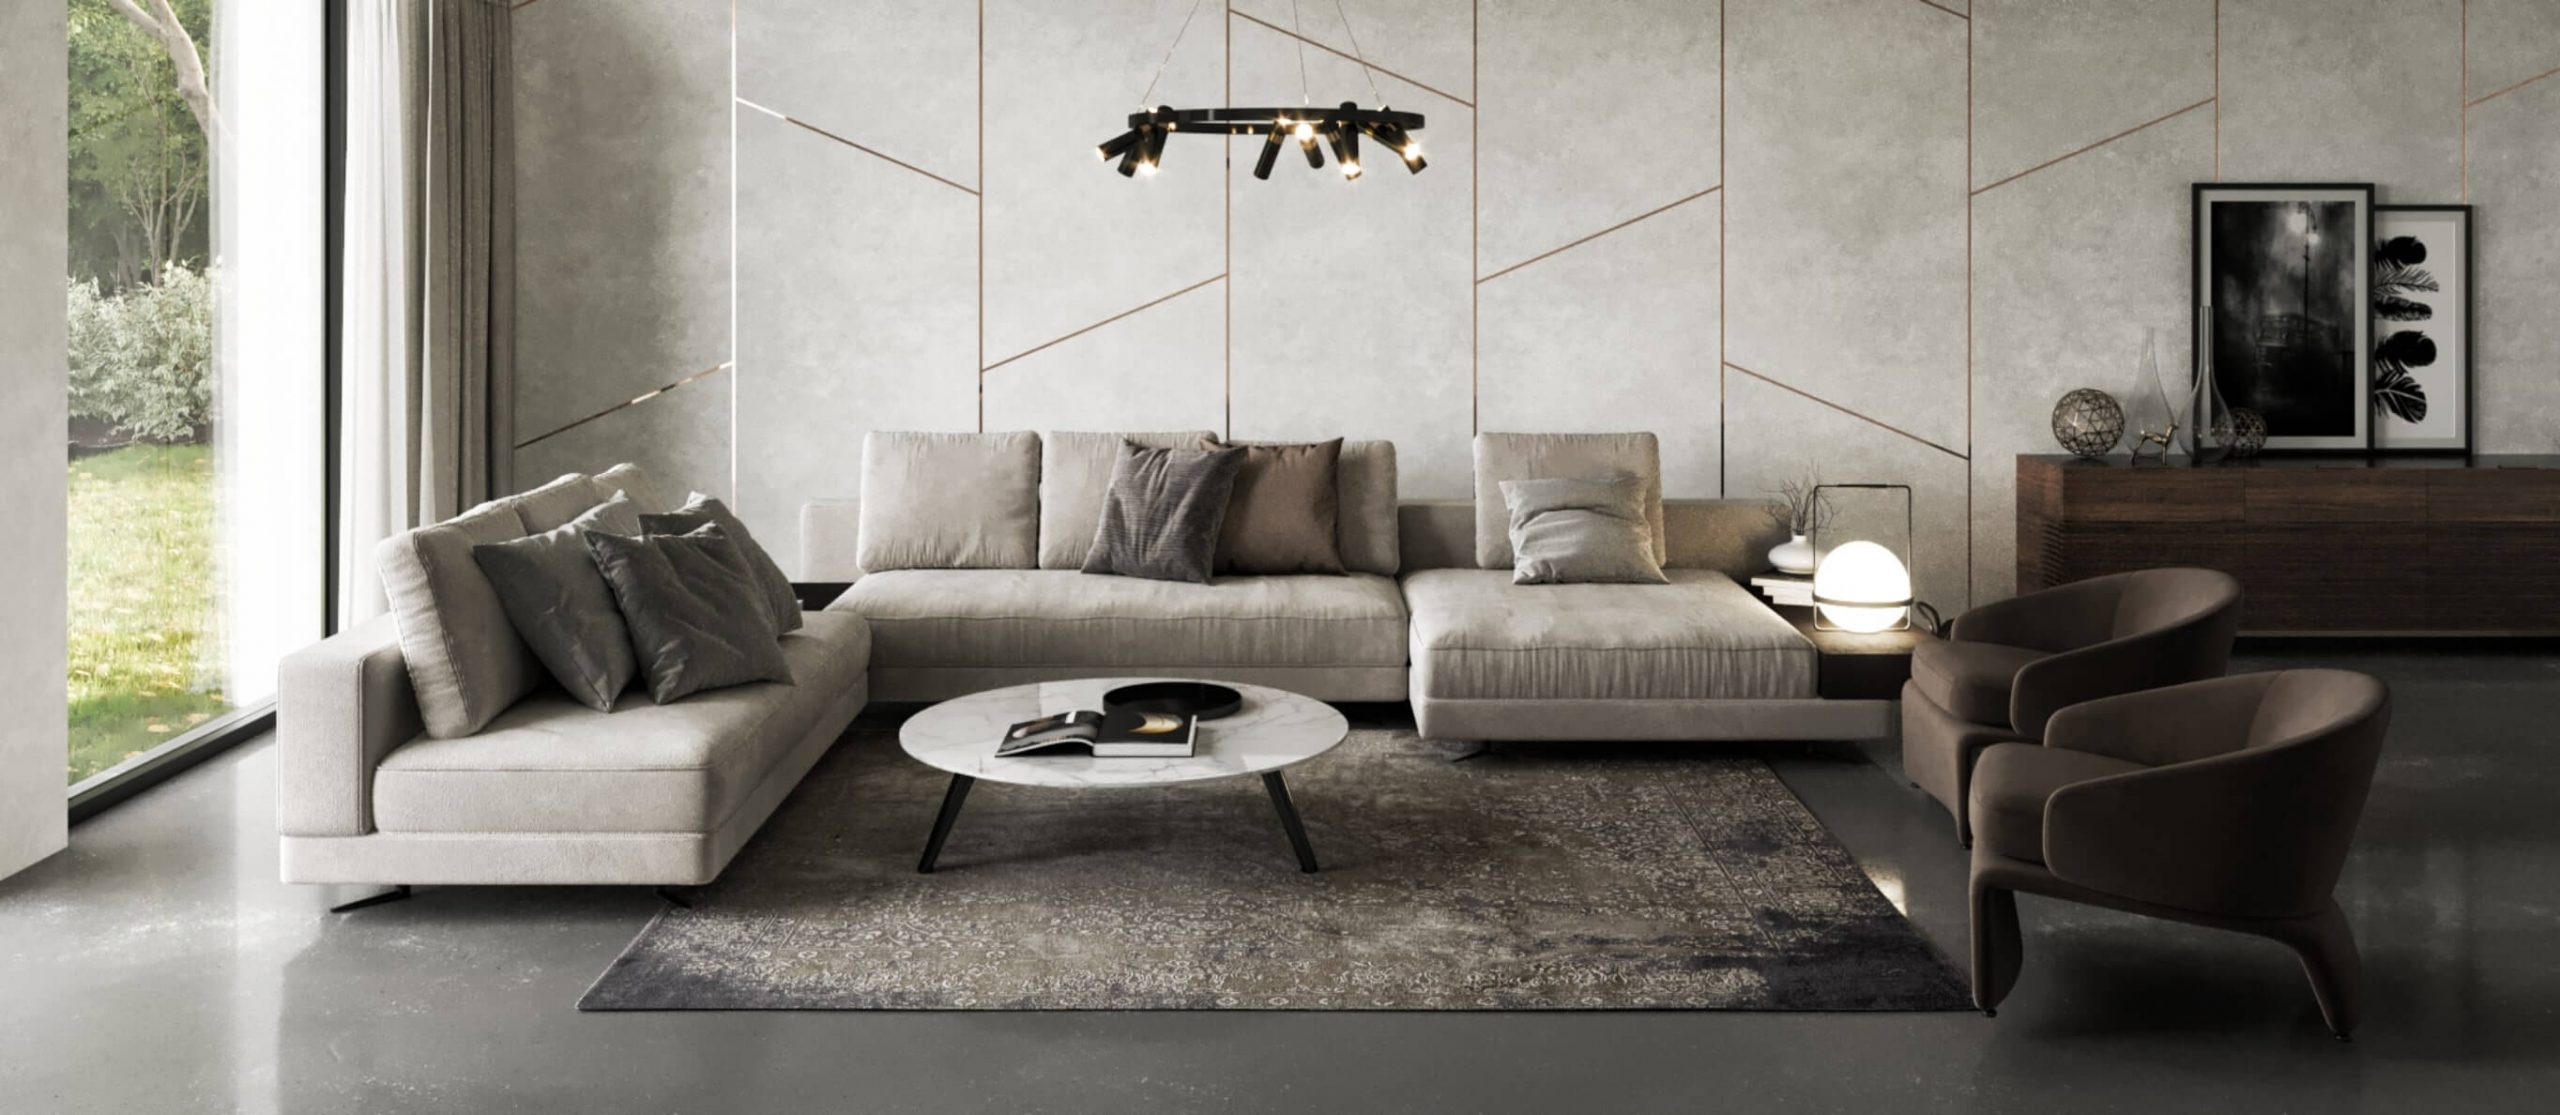 Modern living room with sofas and armchairs